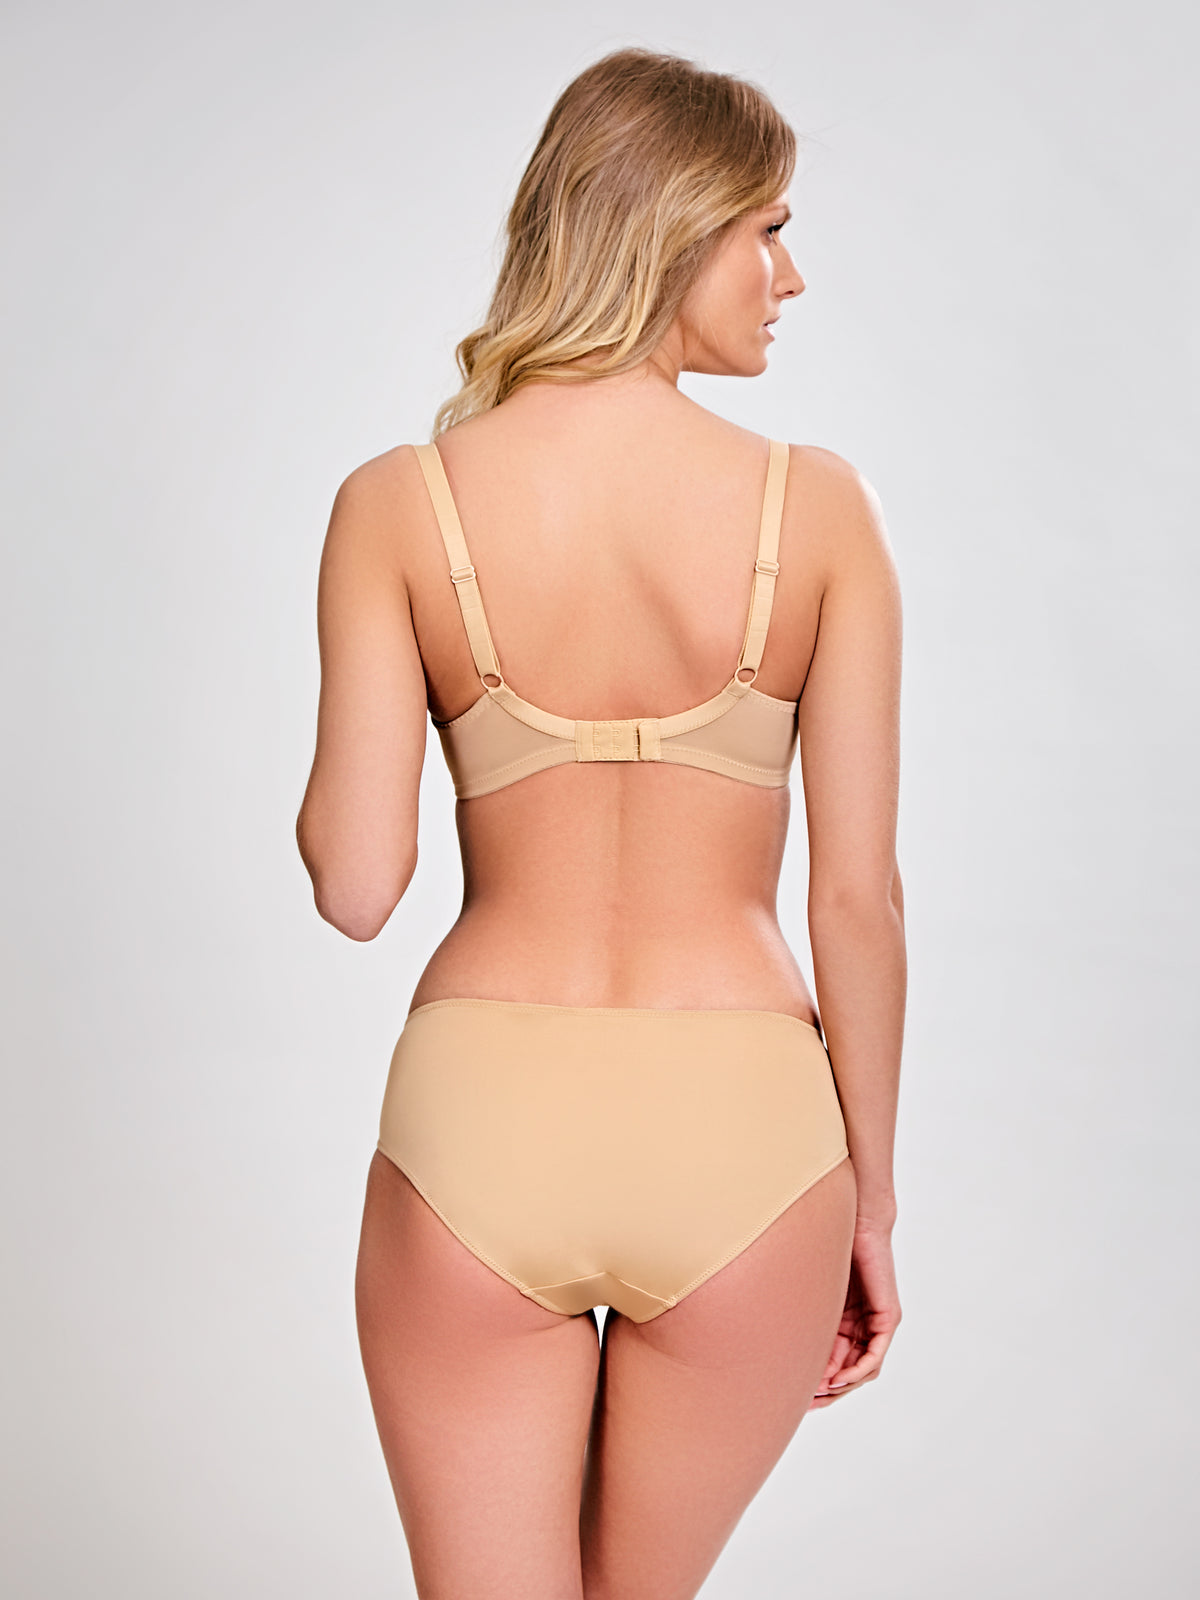 Panache Tango Plunge Non Padded Wired Bra 3256 Nude Rear View